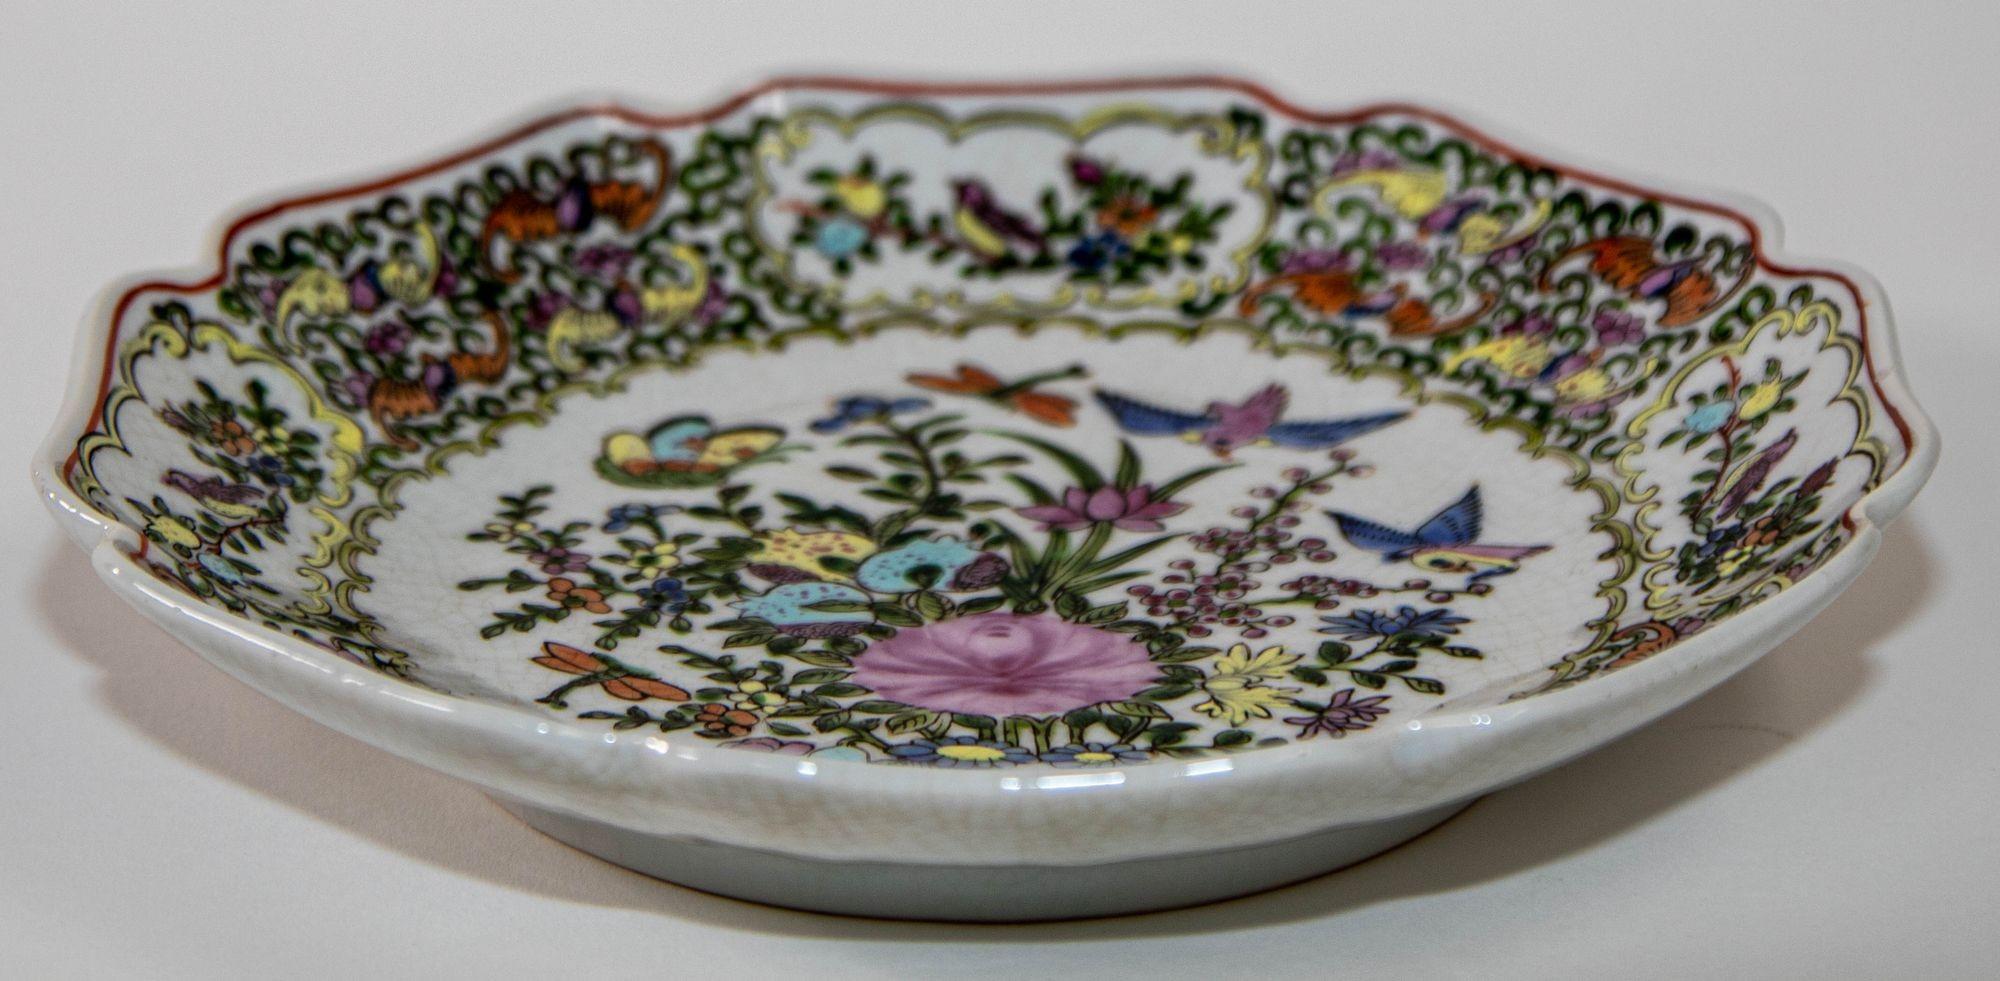 Vintage famille Rose Porcelain plate with birds and flowers hand painted decor For Sale 2